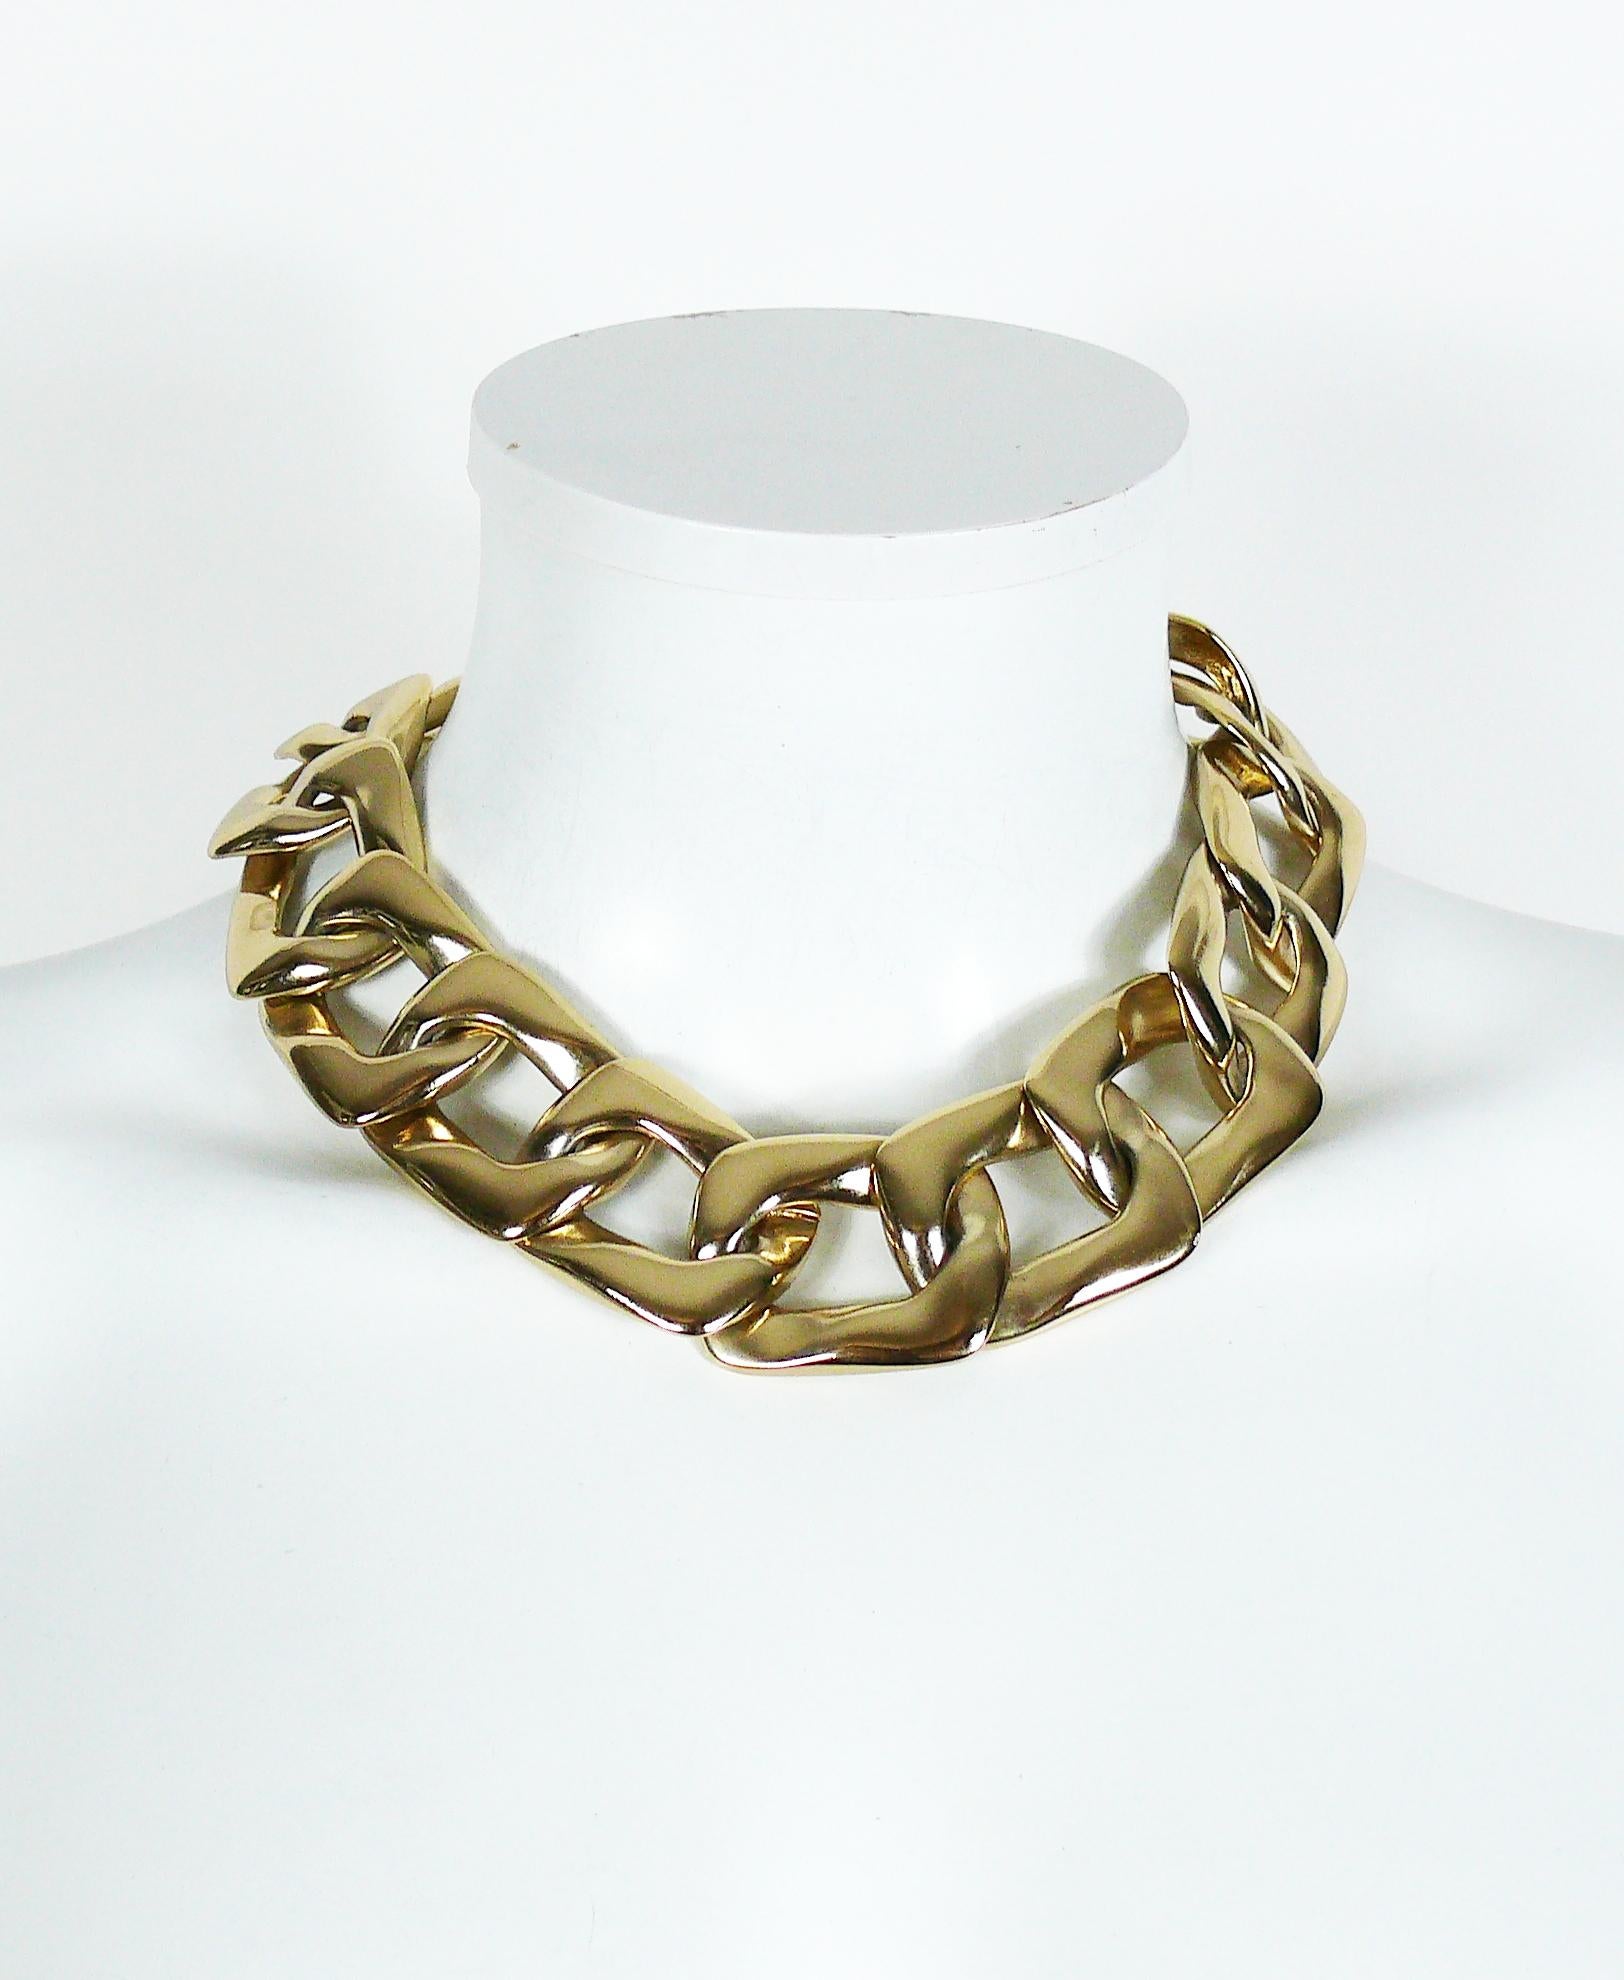 YVES SAINT LAURENT vintage chunky gold toned curb chain necklace.

Hook clasp closure.

Embossed YSL Made in France.

Indicative measurements : adjustable length from approx 45 cm (17.72 inches) to approx. 50 cm (19.69 inches) / width approx. 3.2 cm